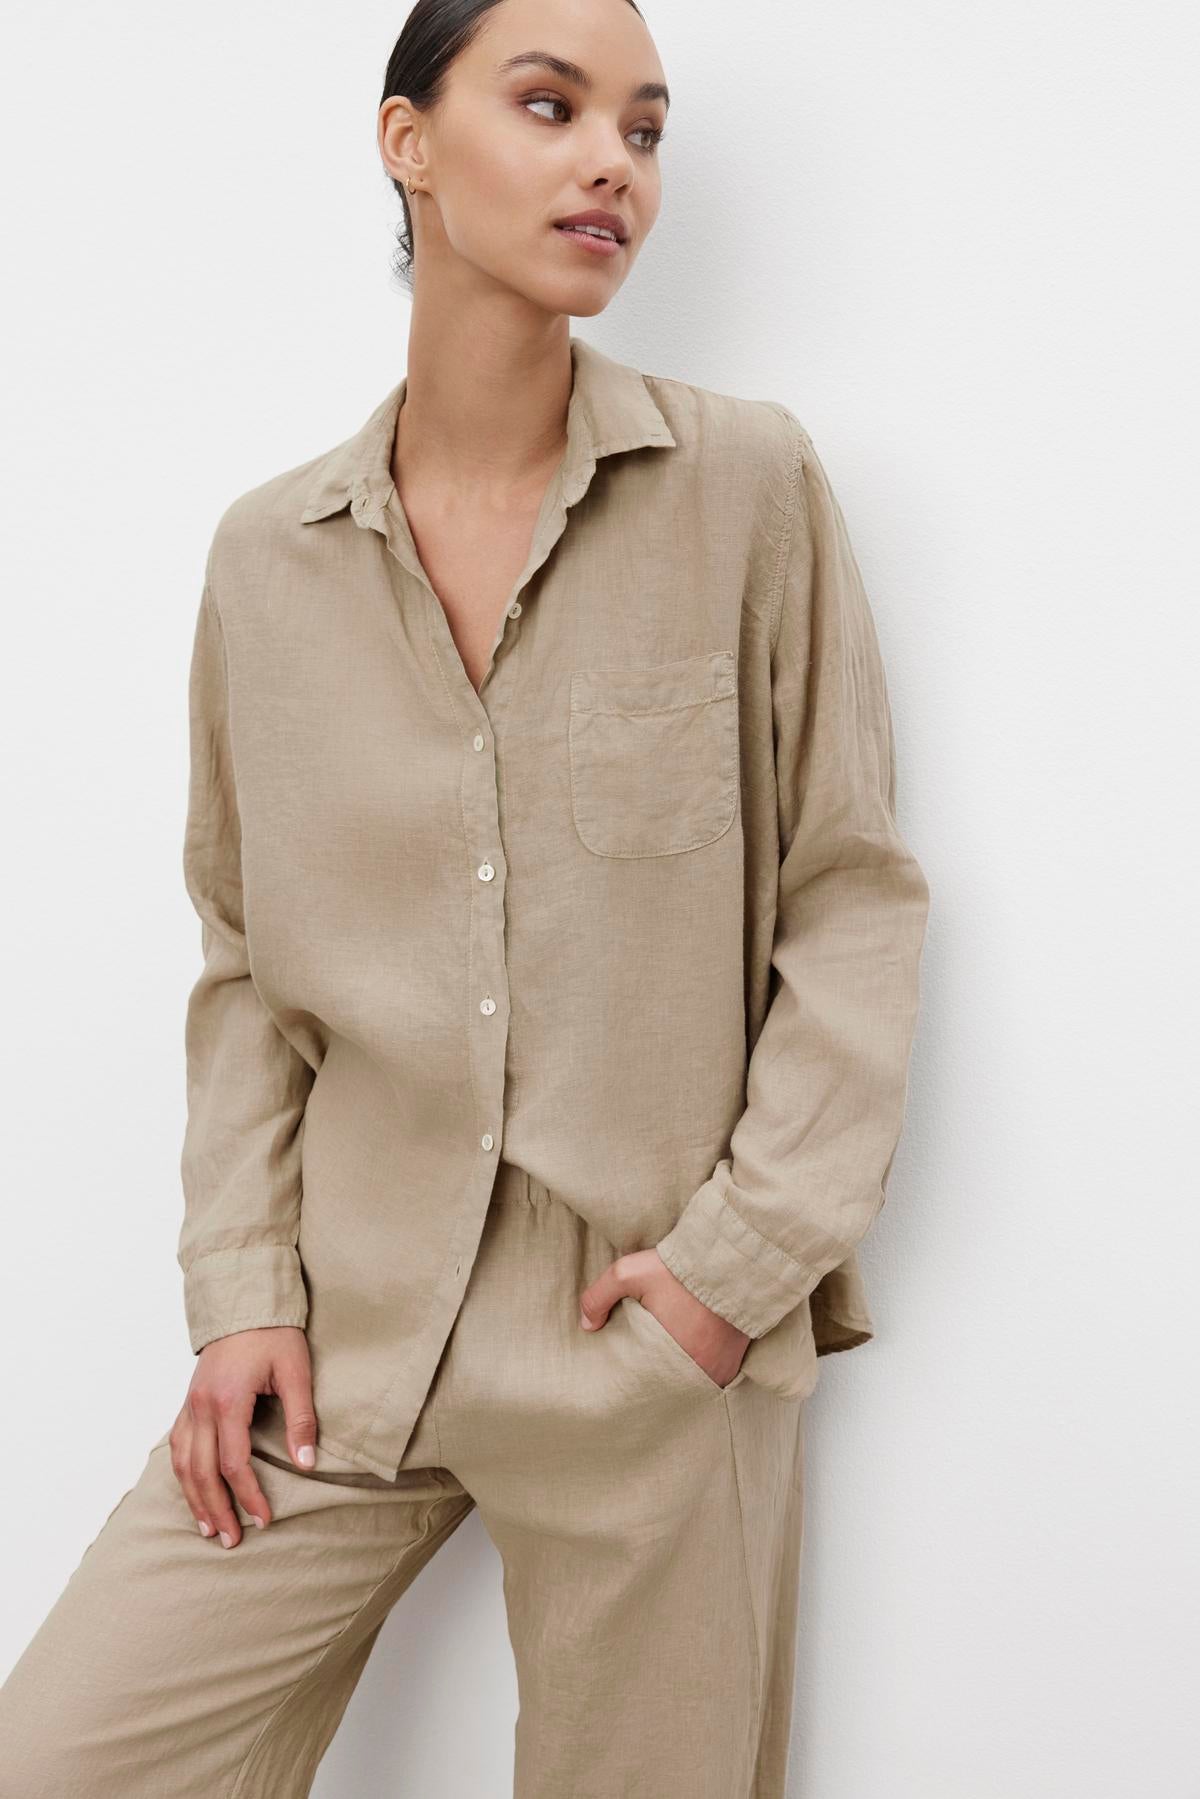 A person wearing a light brown Velvet by Jenny Graham MULHOLLAND LINEN SHIRT with a scooped hemline and matching trousers stands against a white background, with one hand in their pocket.-36463469658305